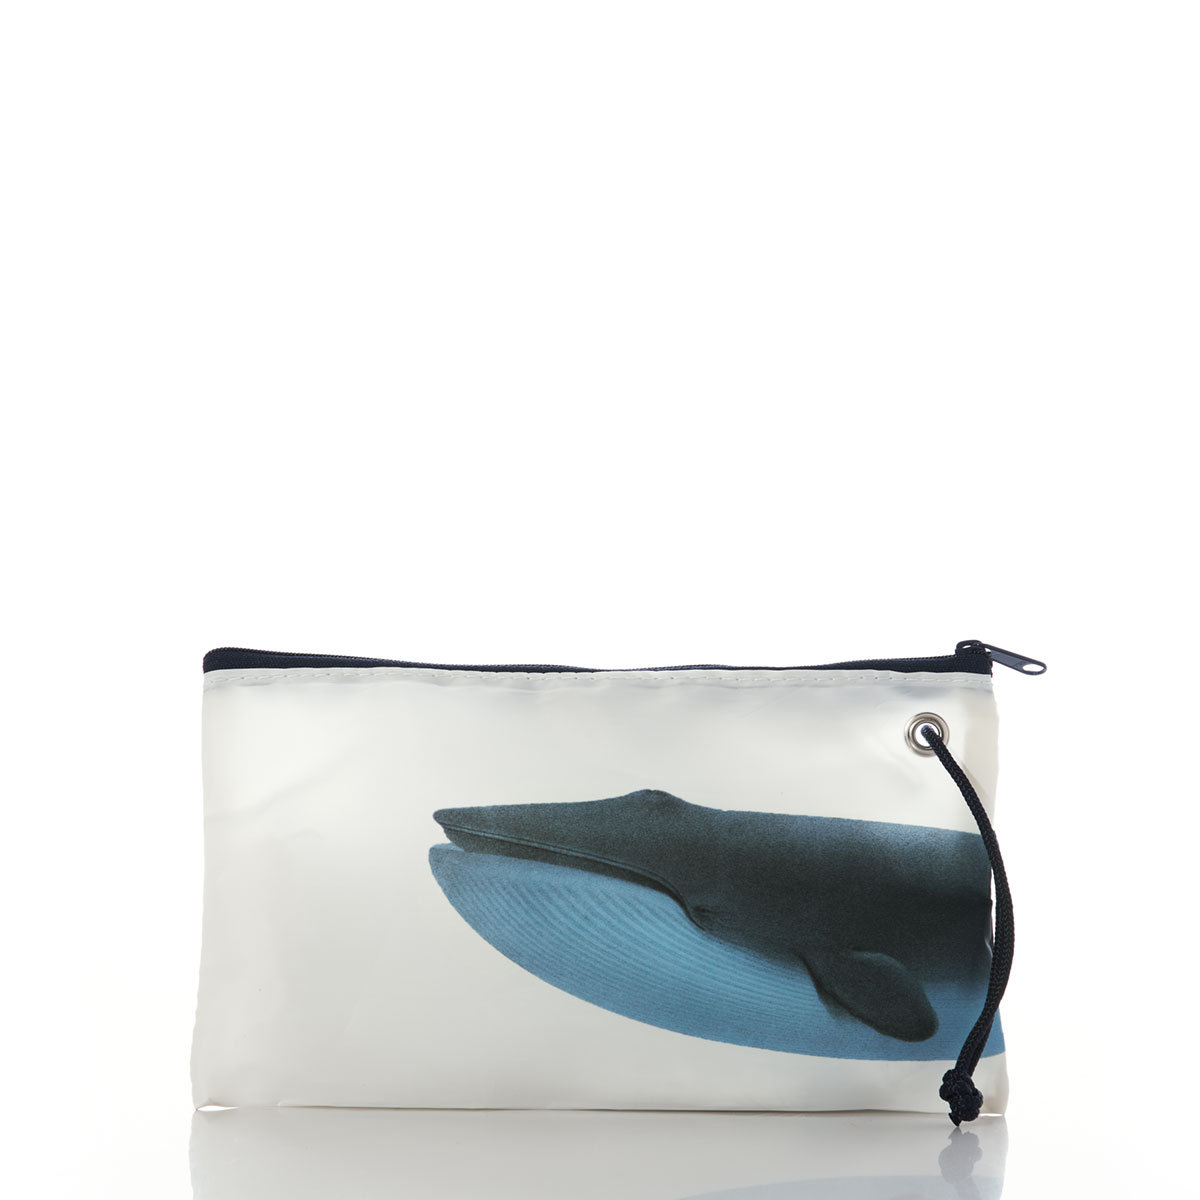 Toiletry pouch as a clutch - chic or silly?, Page 11